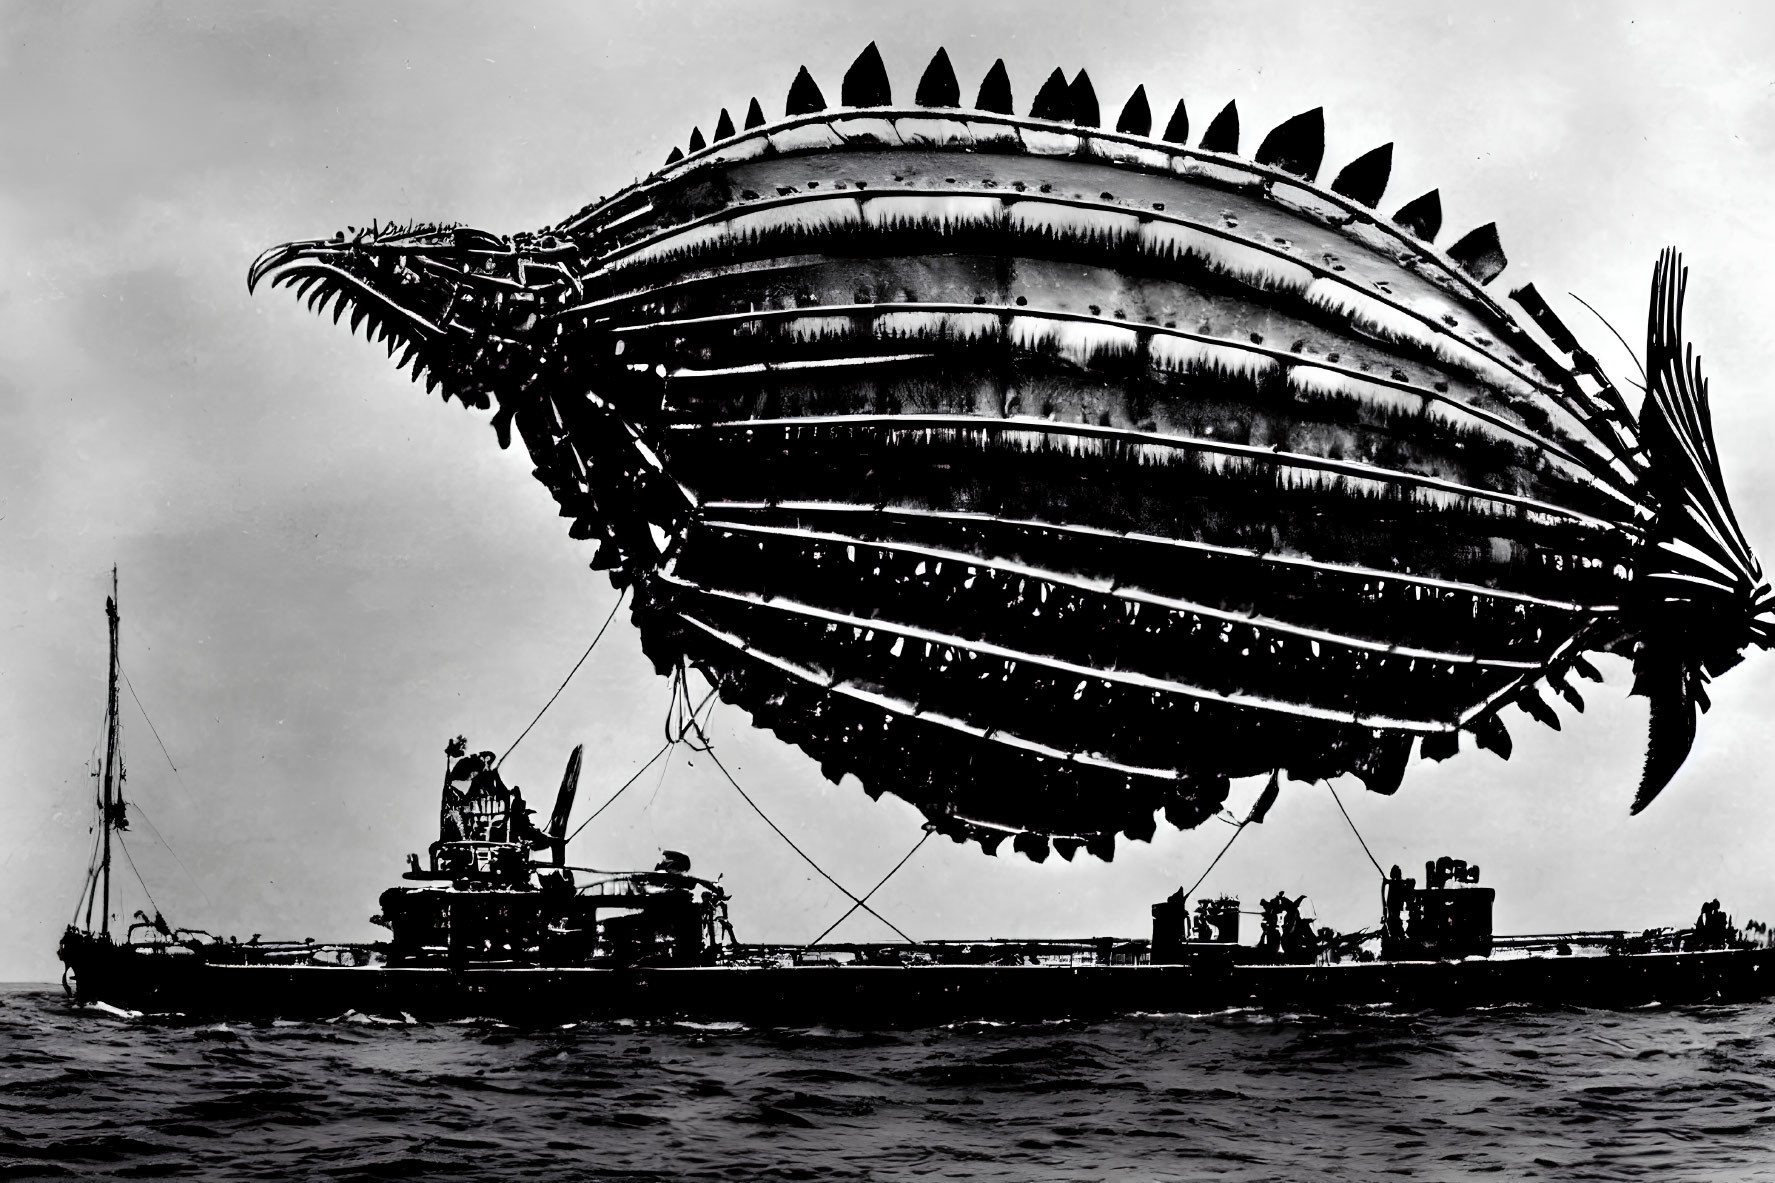 Monochromatic fantasy airship with fish-like features above old naval ship